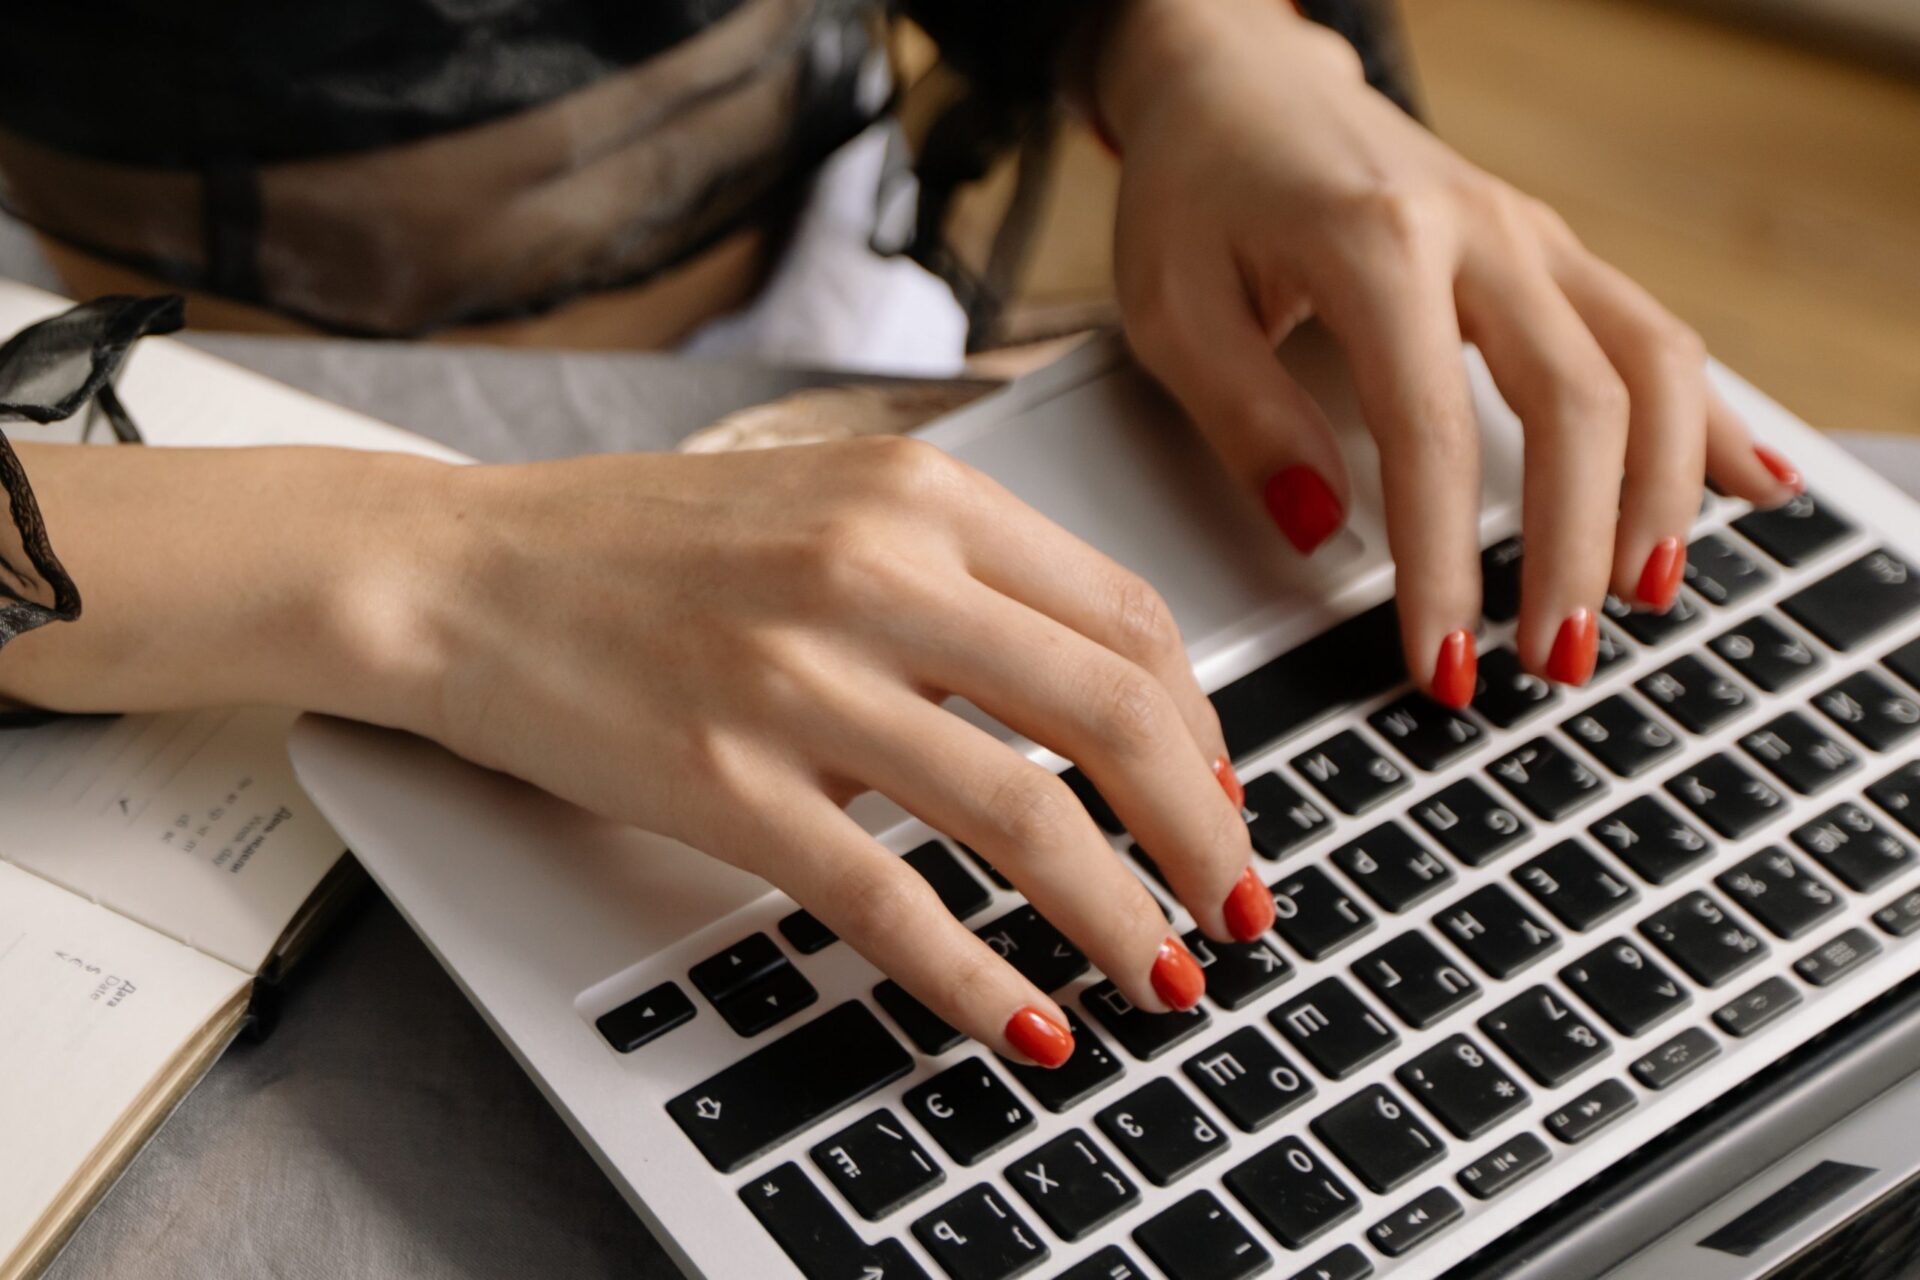 How Can You Avoid Wrist Pain from Typing?